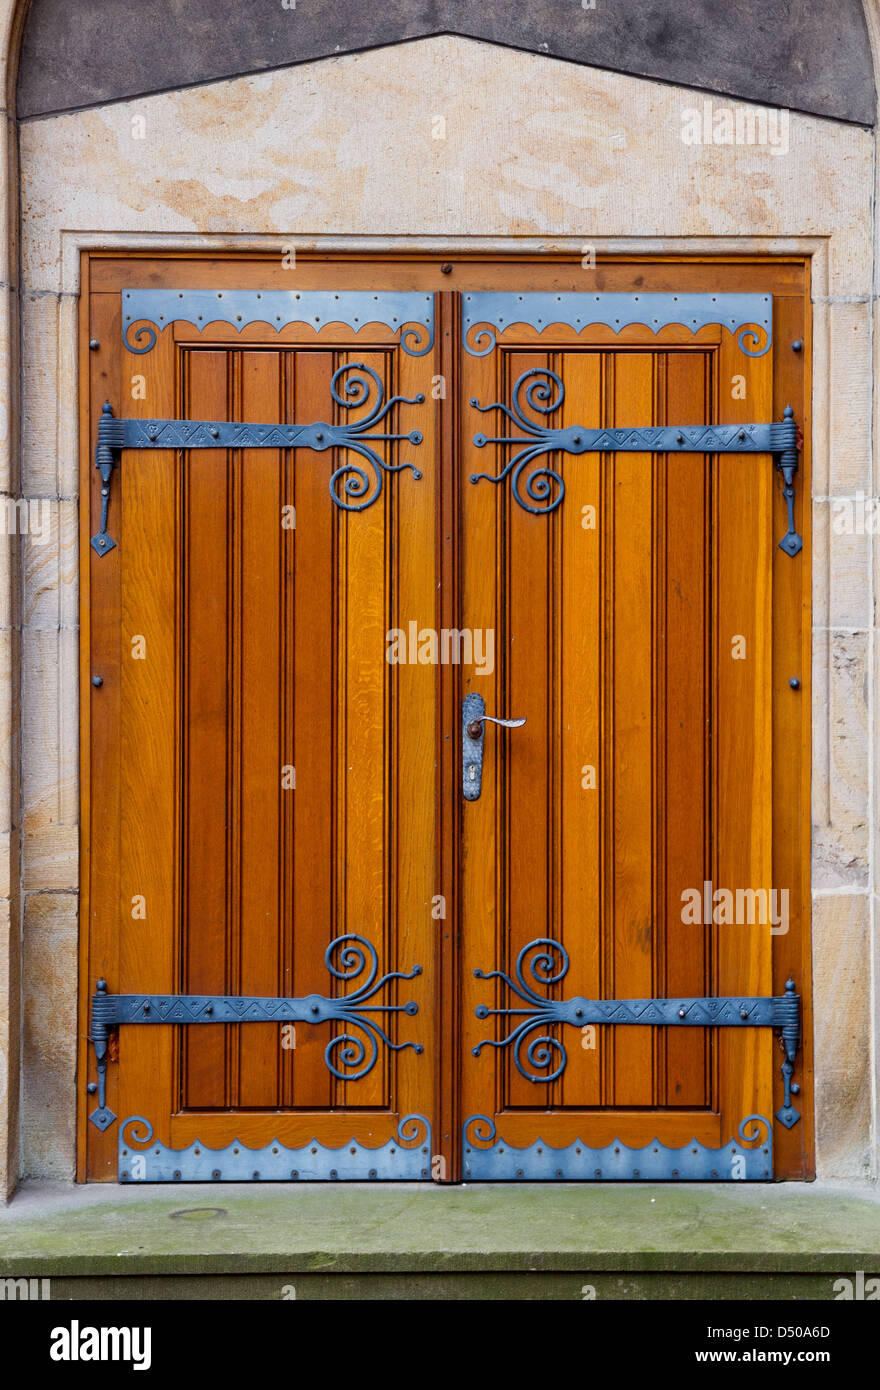 Portal with wooden doors and decorative fittings Stock Photo